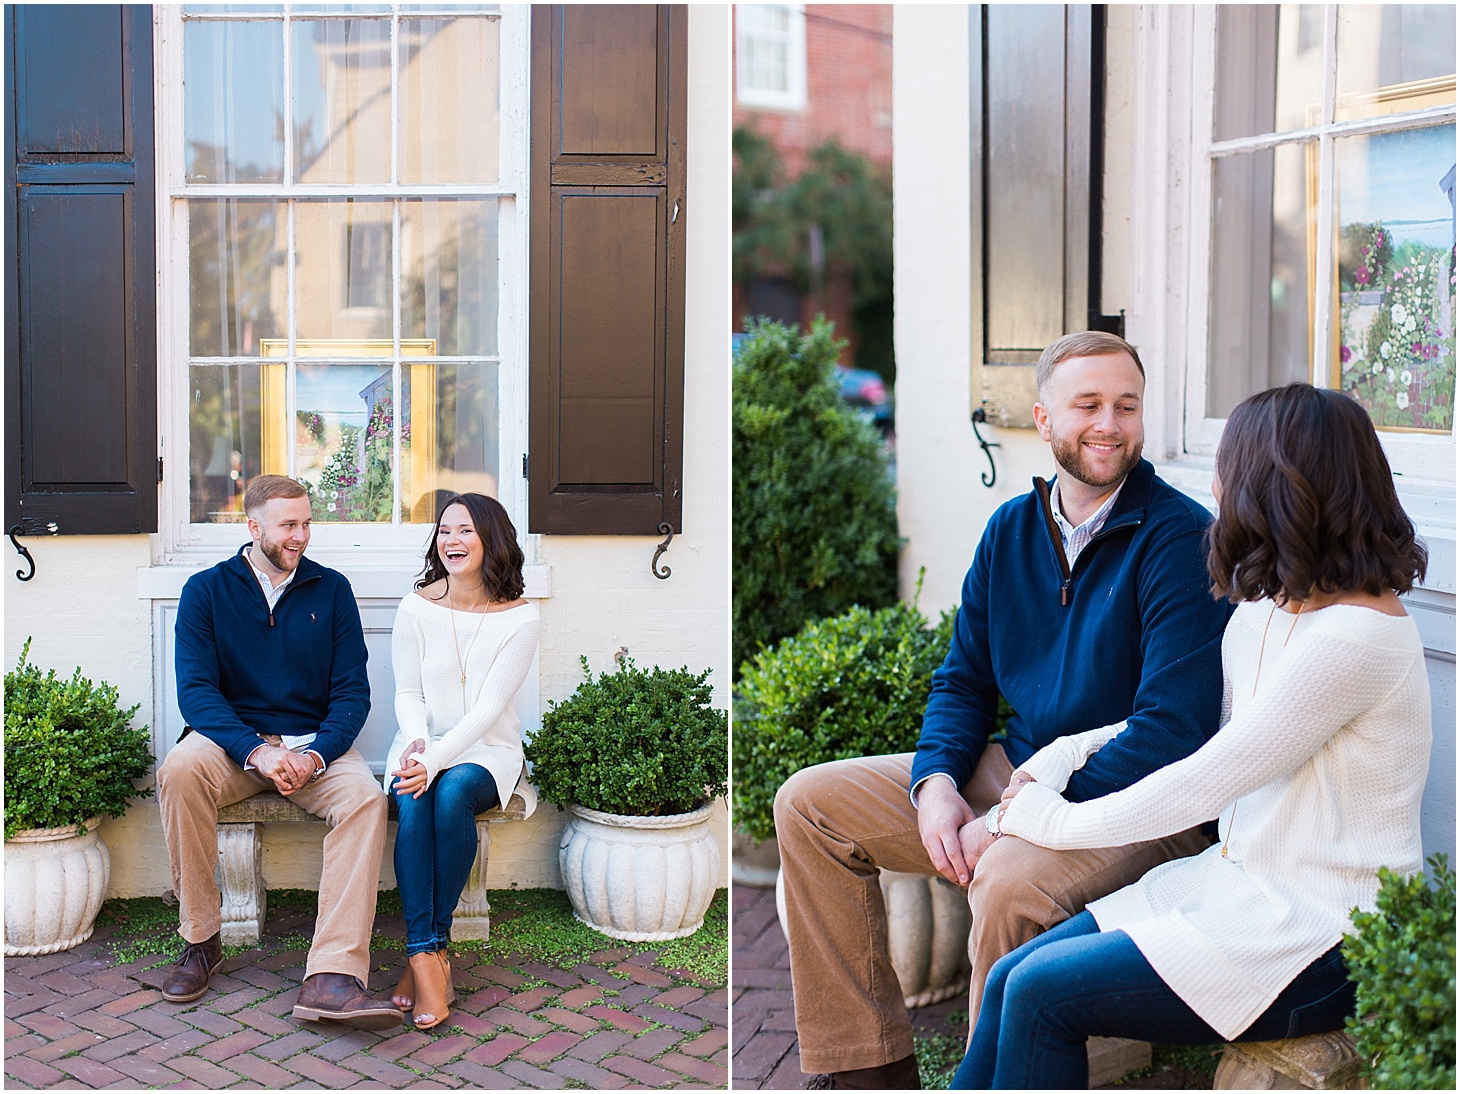 Engagement Portraits in Old Town Alexandria | Sunrise Engagement Session in Washington, DC | Sarah Bradshaw Photography